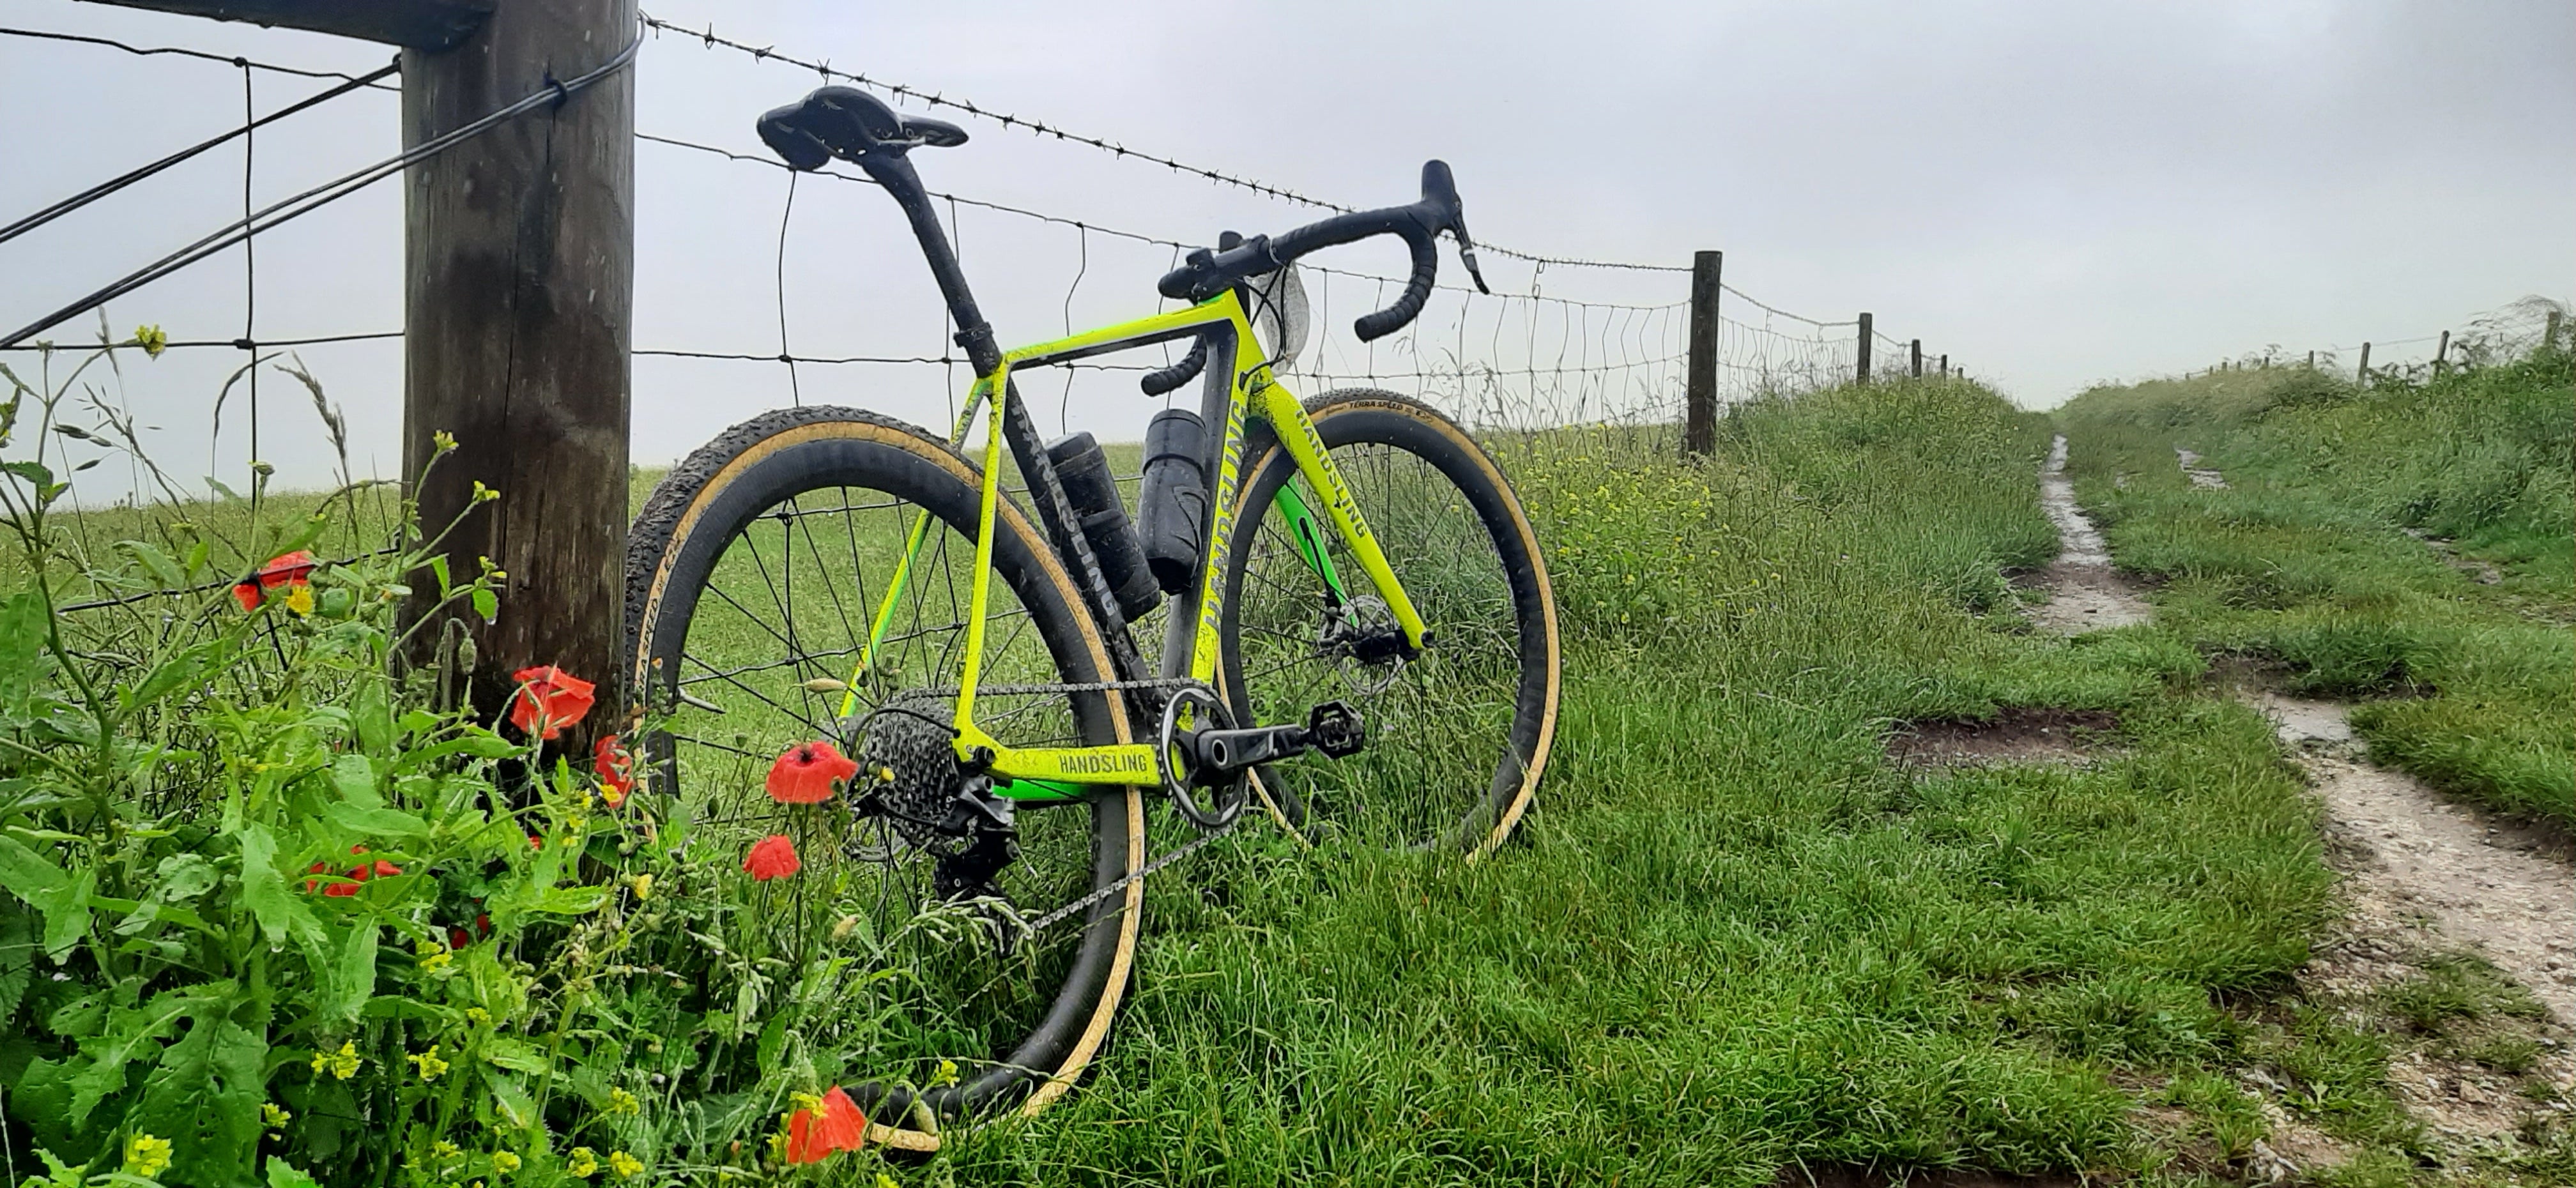 Racing the Handsling CEXevo on the 100-mile South Downs Way